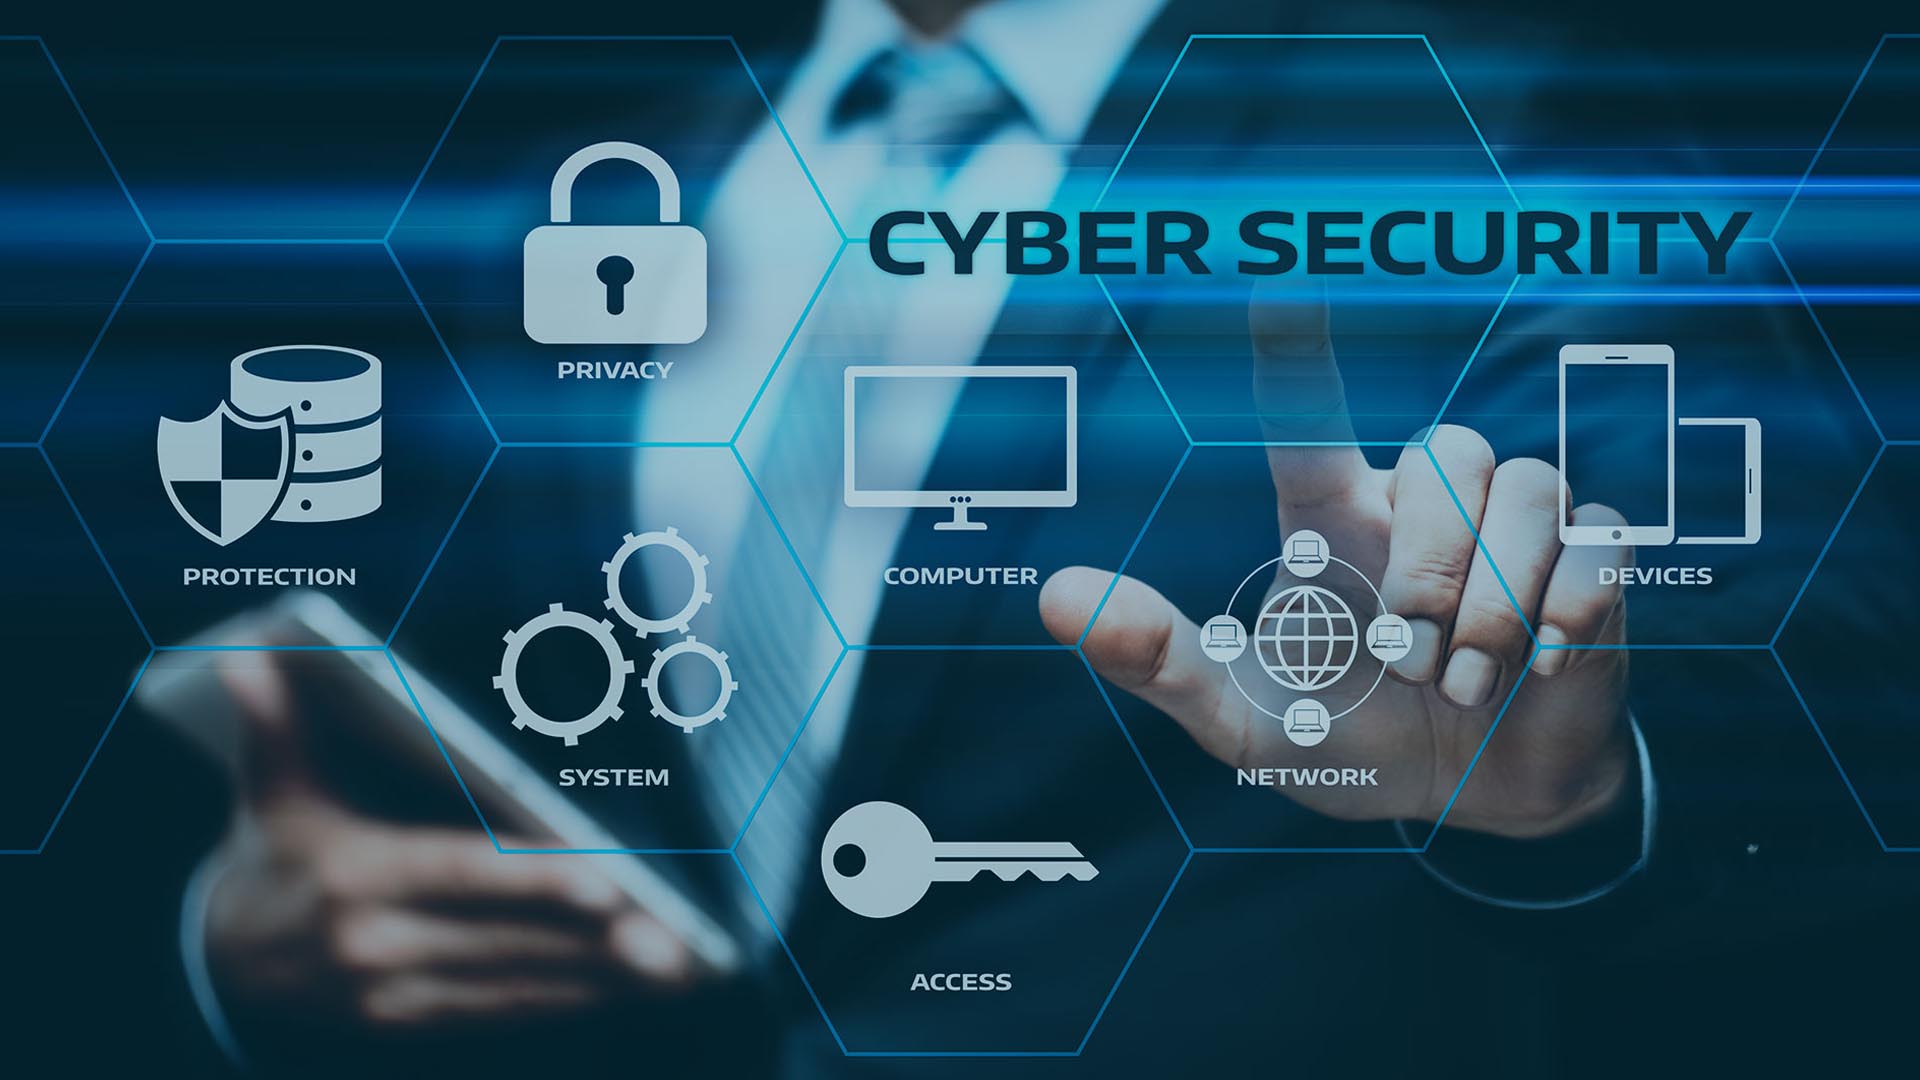 Cyber Security Solutions and Services